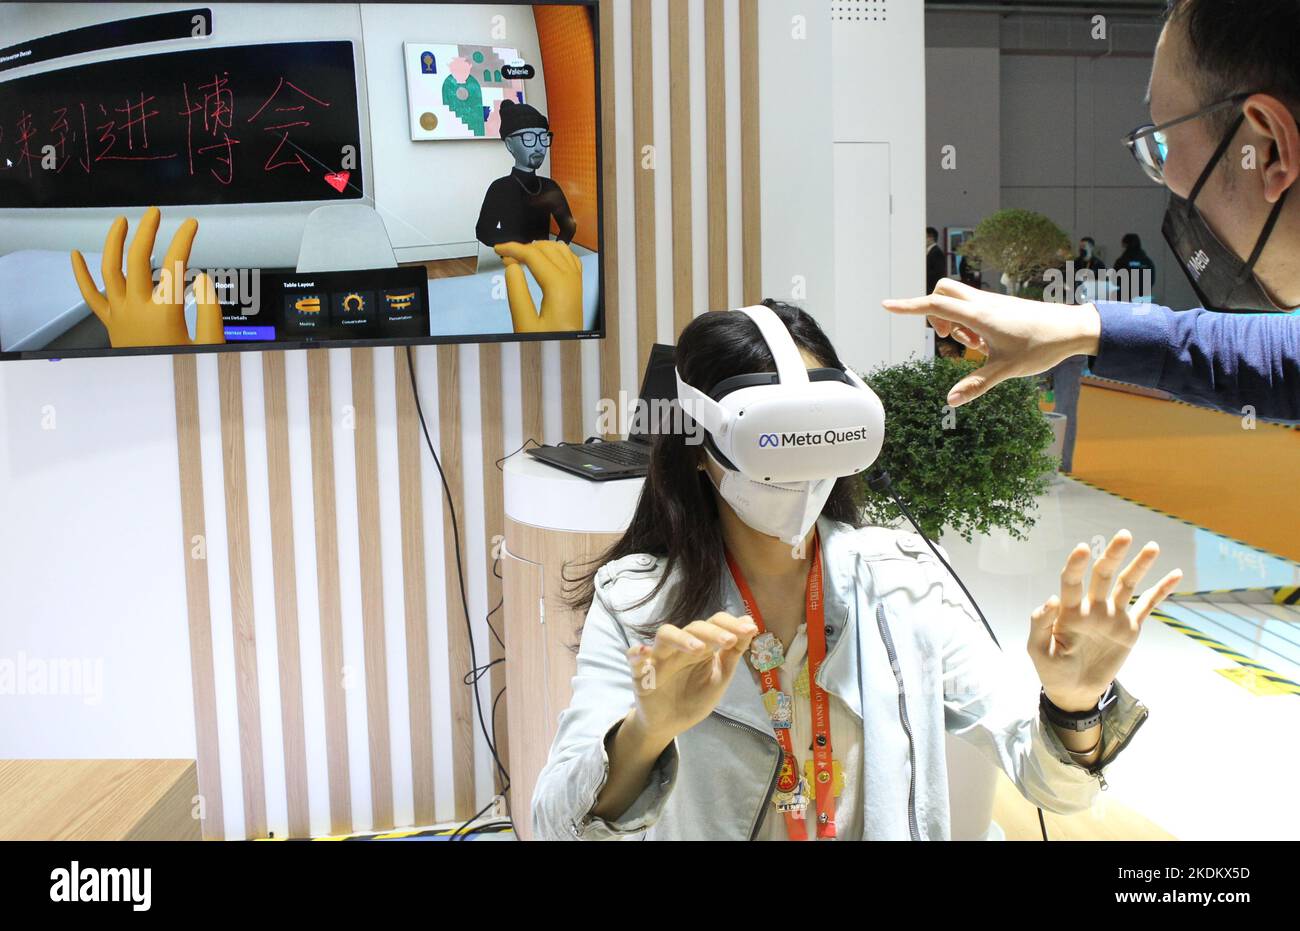 Shanghai. 7th Nov, 2022. A visitor tries a VR device to experience the metaverse in the Intelligent Industry and Information Technology section of the fifth China International Import Expo (CIIE) in east China's Shanghai, Nov. 7, 2022. Credit: Hou Jun/Xinhua/Alamy Live News Stock Photo